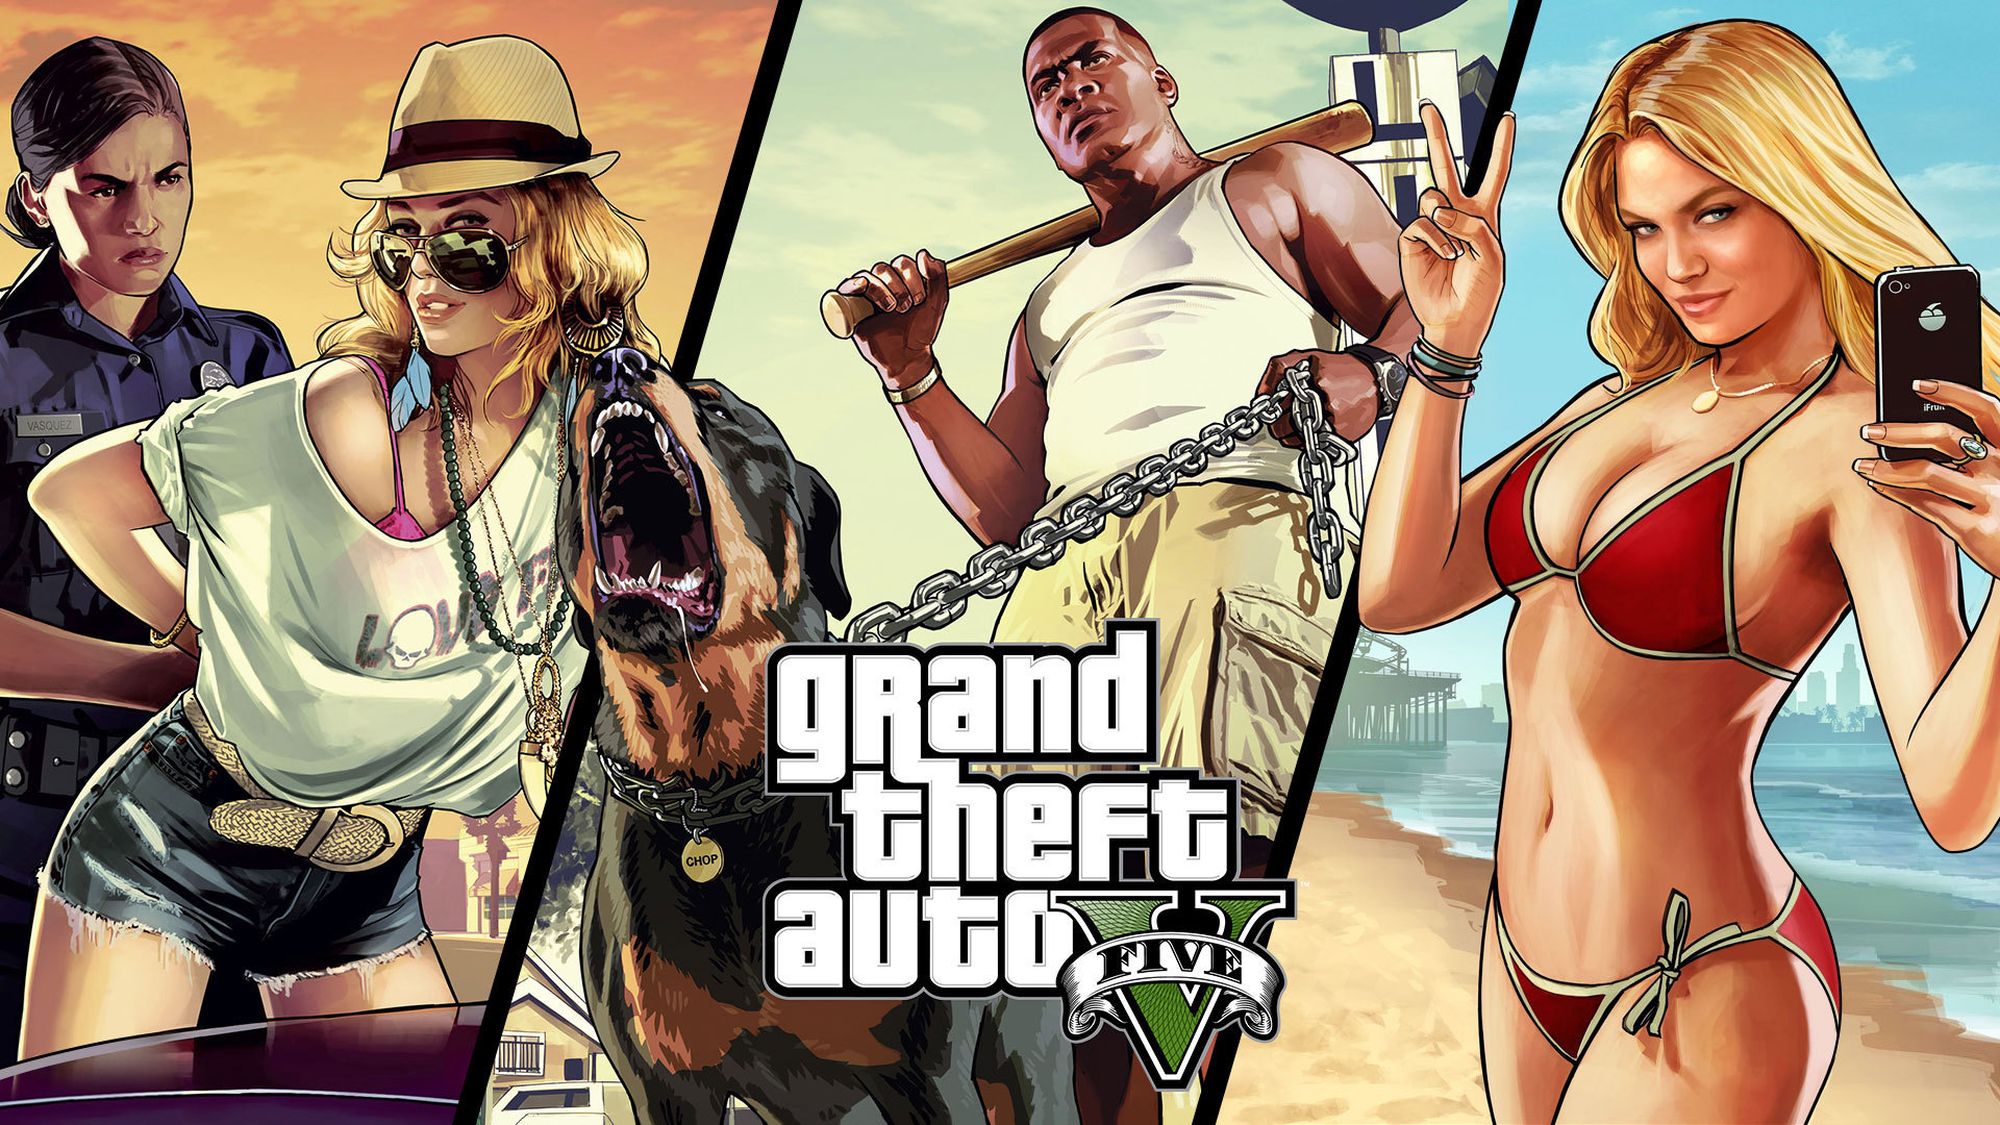 hat, blonde, earrings, grand theft auto, bikini, watch, grand theft auto v, video game, baseball bat, beach, belt, blue eyes, brown hair, chain, dog, franklin clinton, long hair, necklace, peace sign, phone, police, ring, shorts, sky, smile, sunglasses 4K Ultra